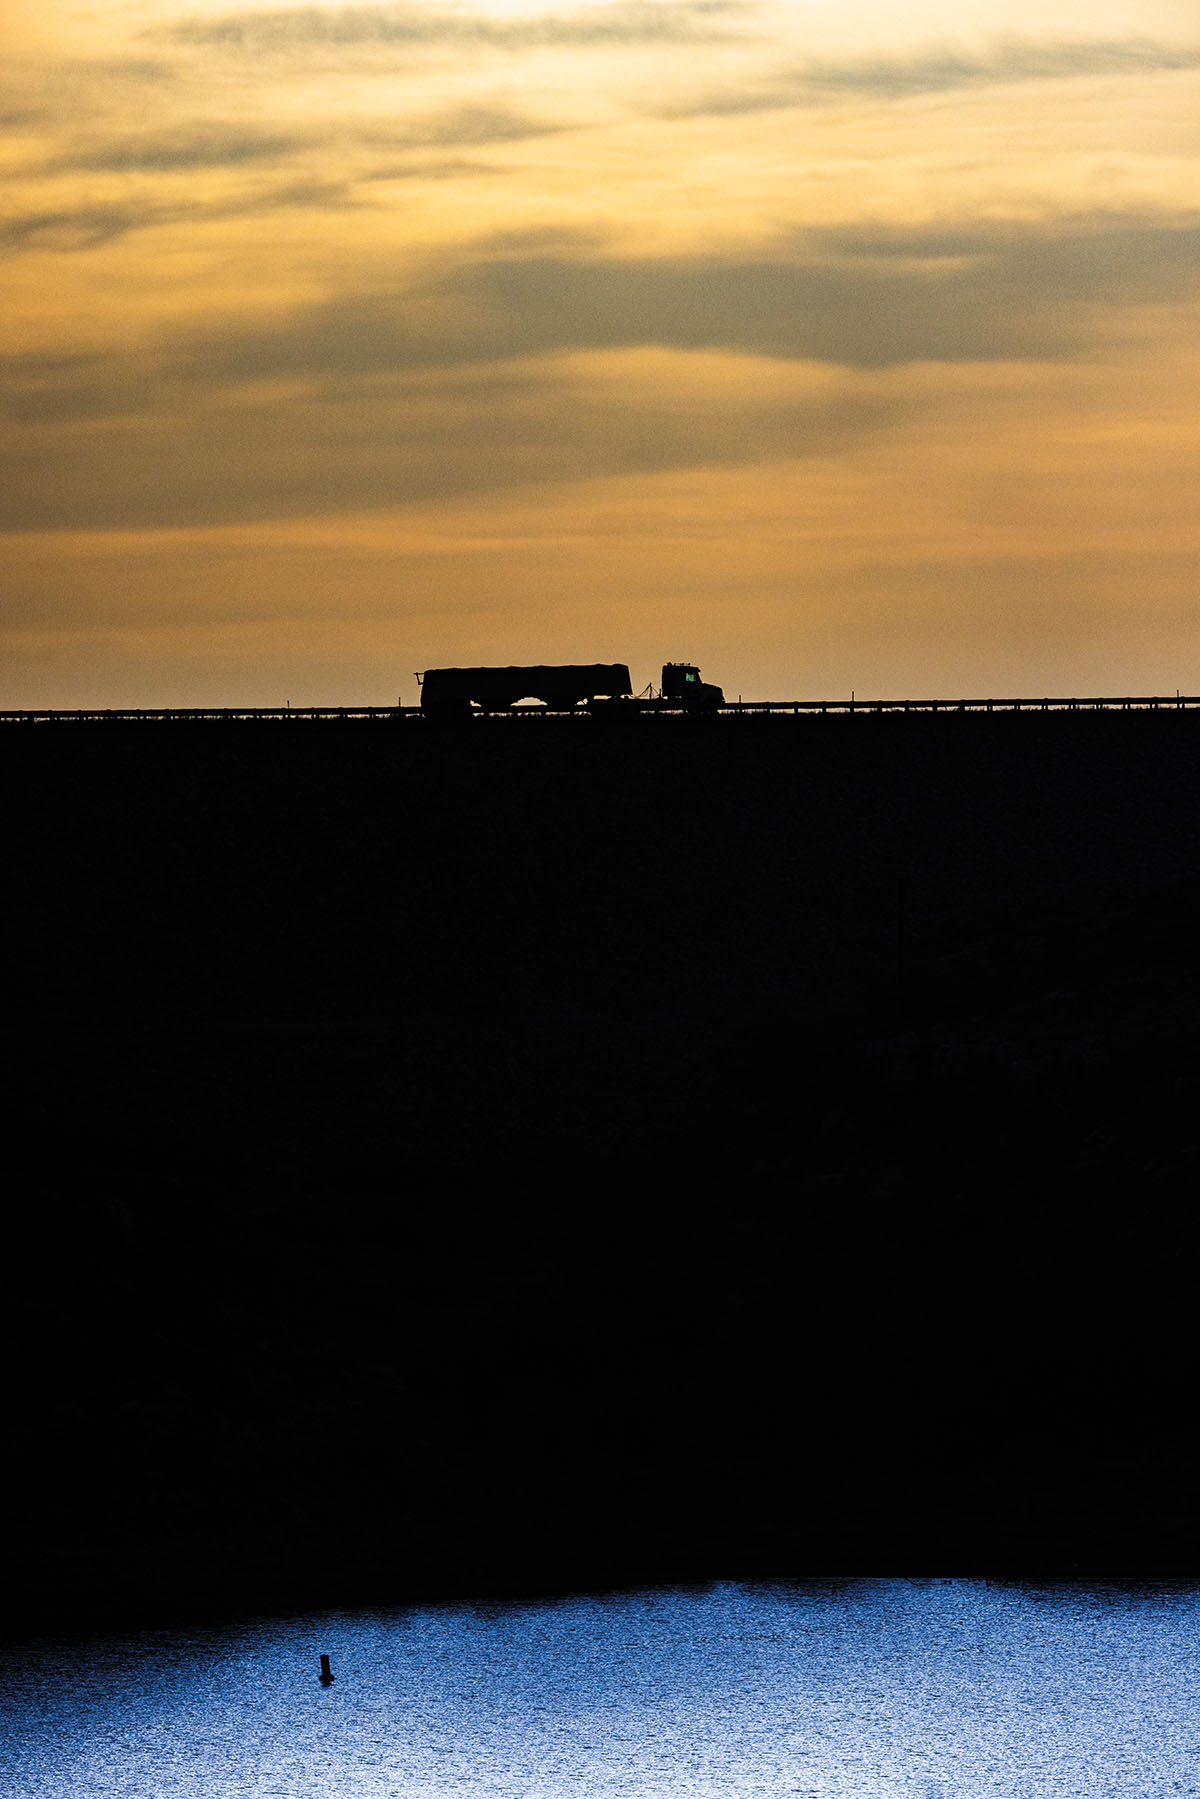 The silhouette of a truck passing along a bridge above dark blue water